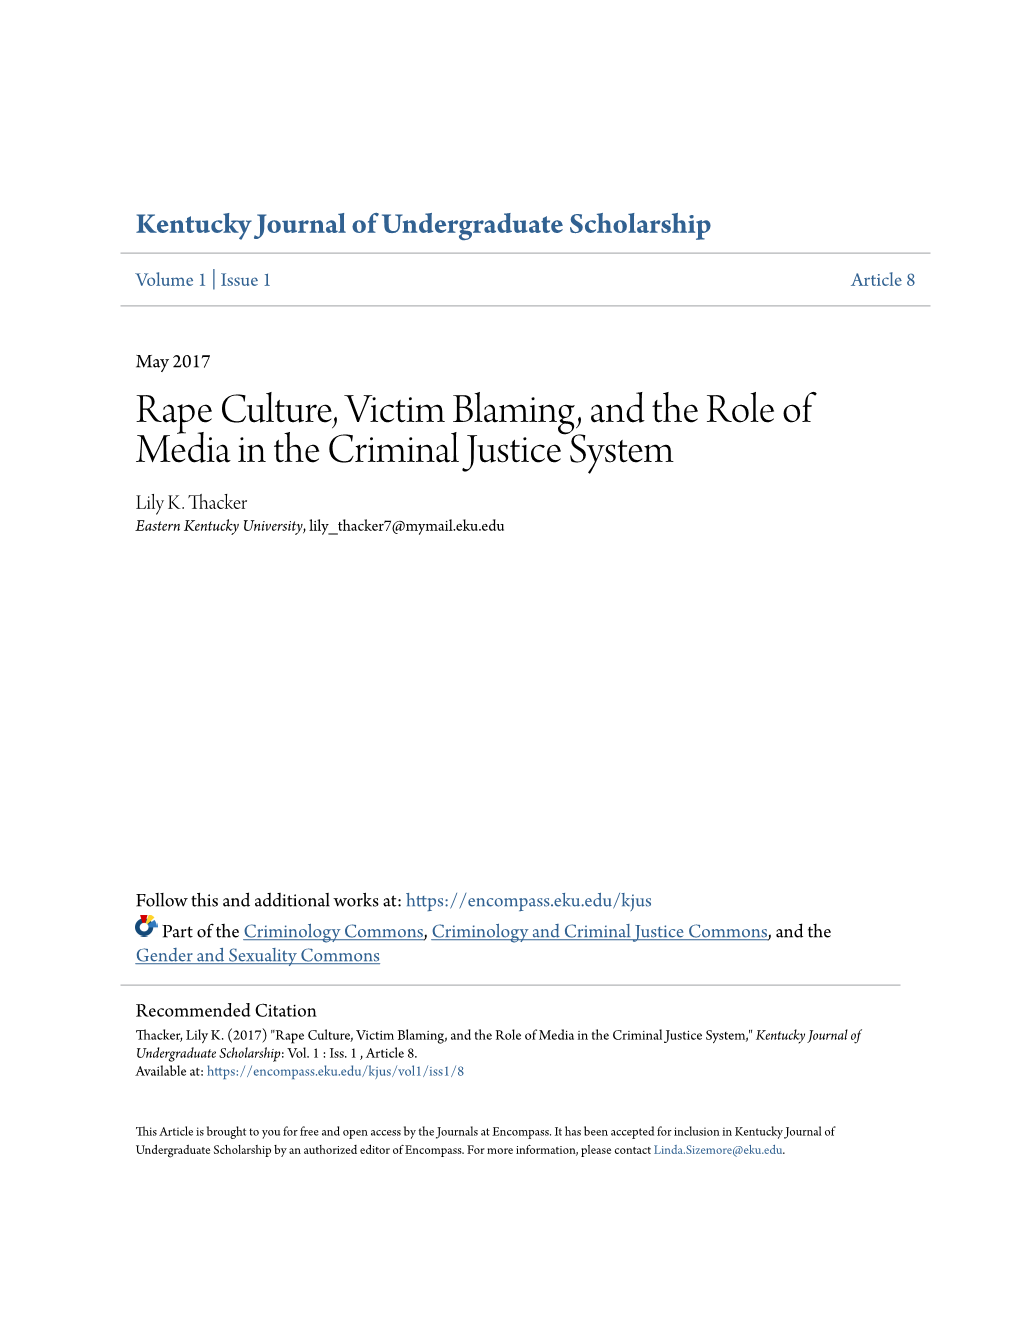 Rape Culture, Victim Blaming, and the Role of Media in the Criminal Justice System Lily K